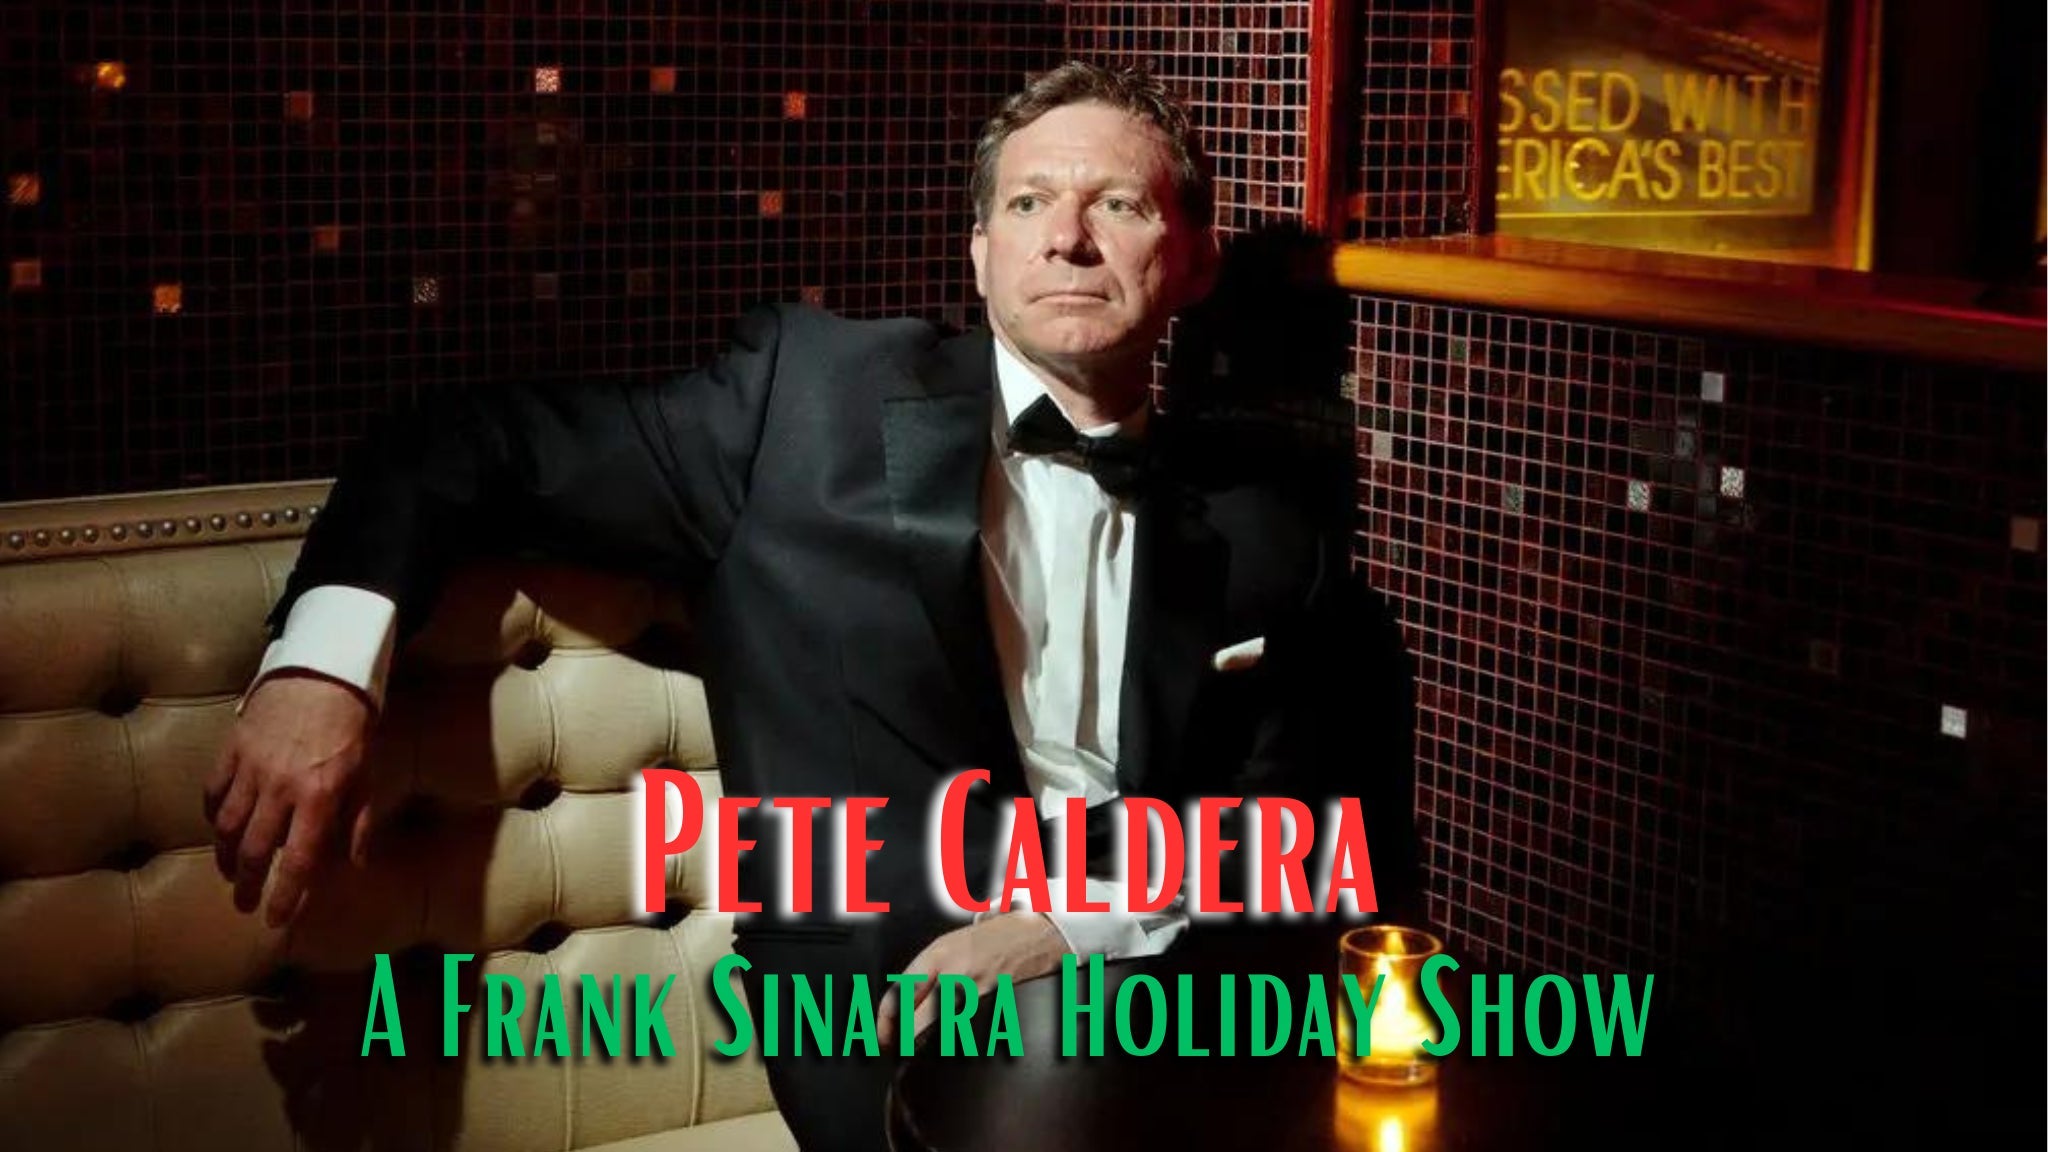 Pete Caldera: A Frank Sinatra Holiday Show in Milford promo photo for Ghostlight 24 Hour Access presale offer code